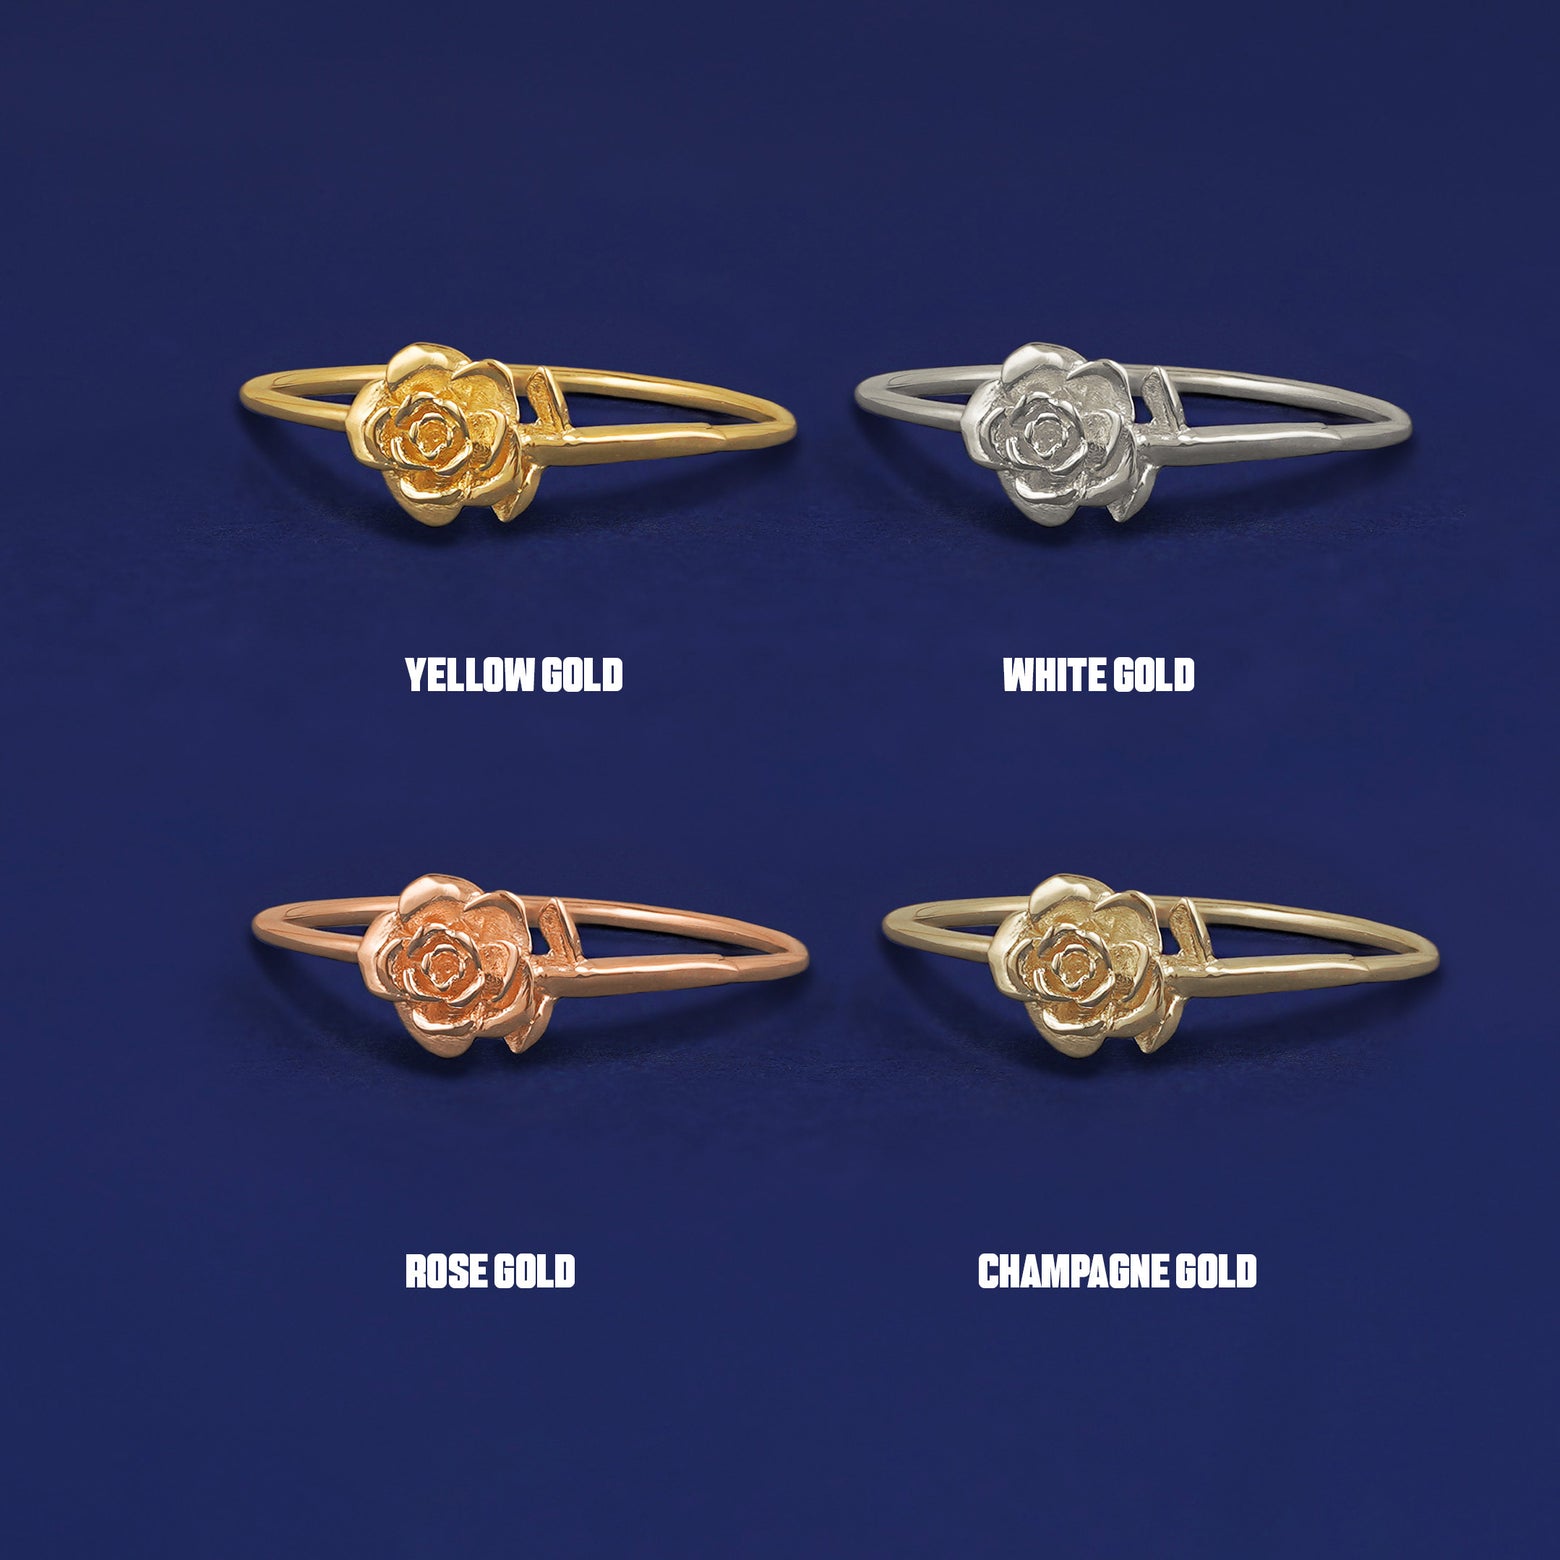 Four versions of the Rose Ring shown in options of yellow, white, rose and champagne gold